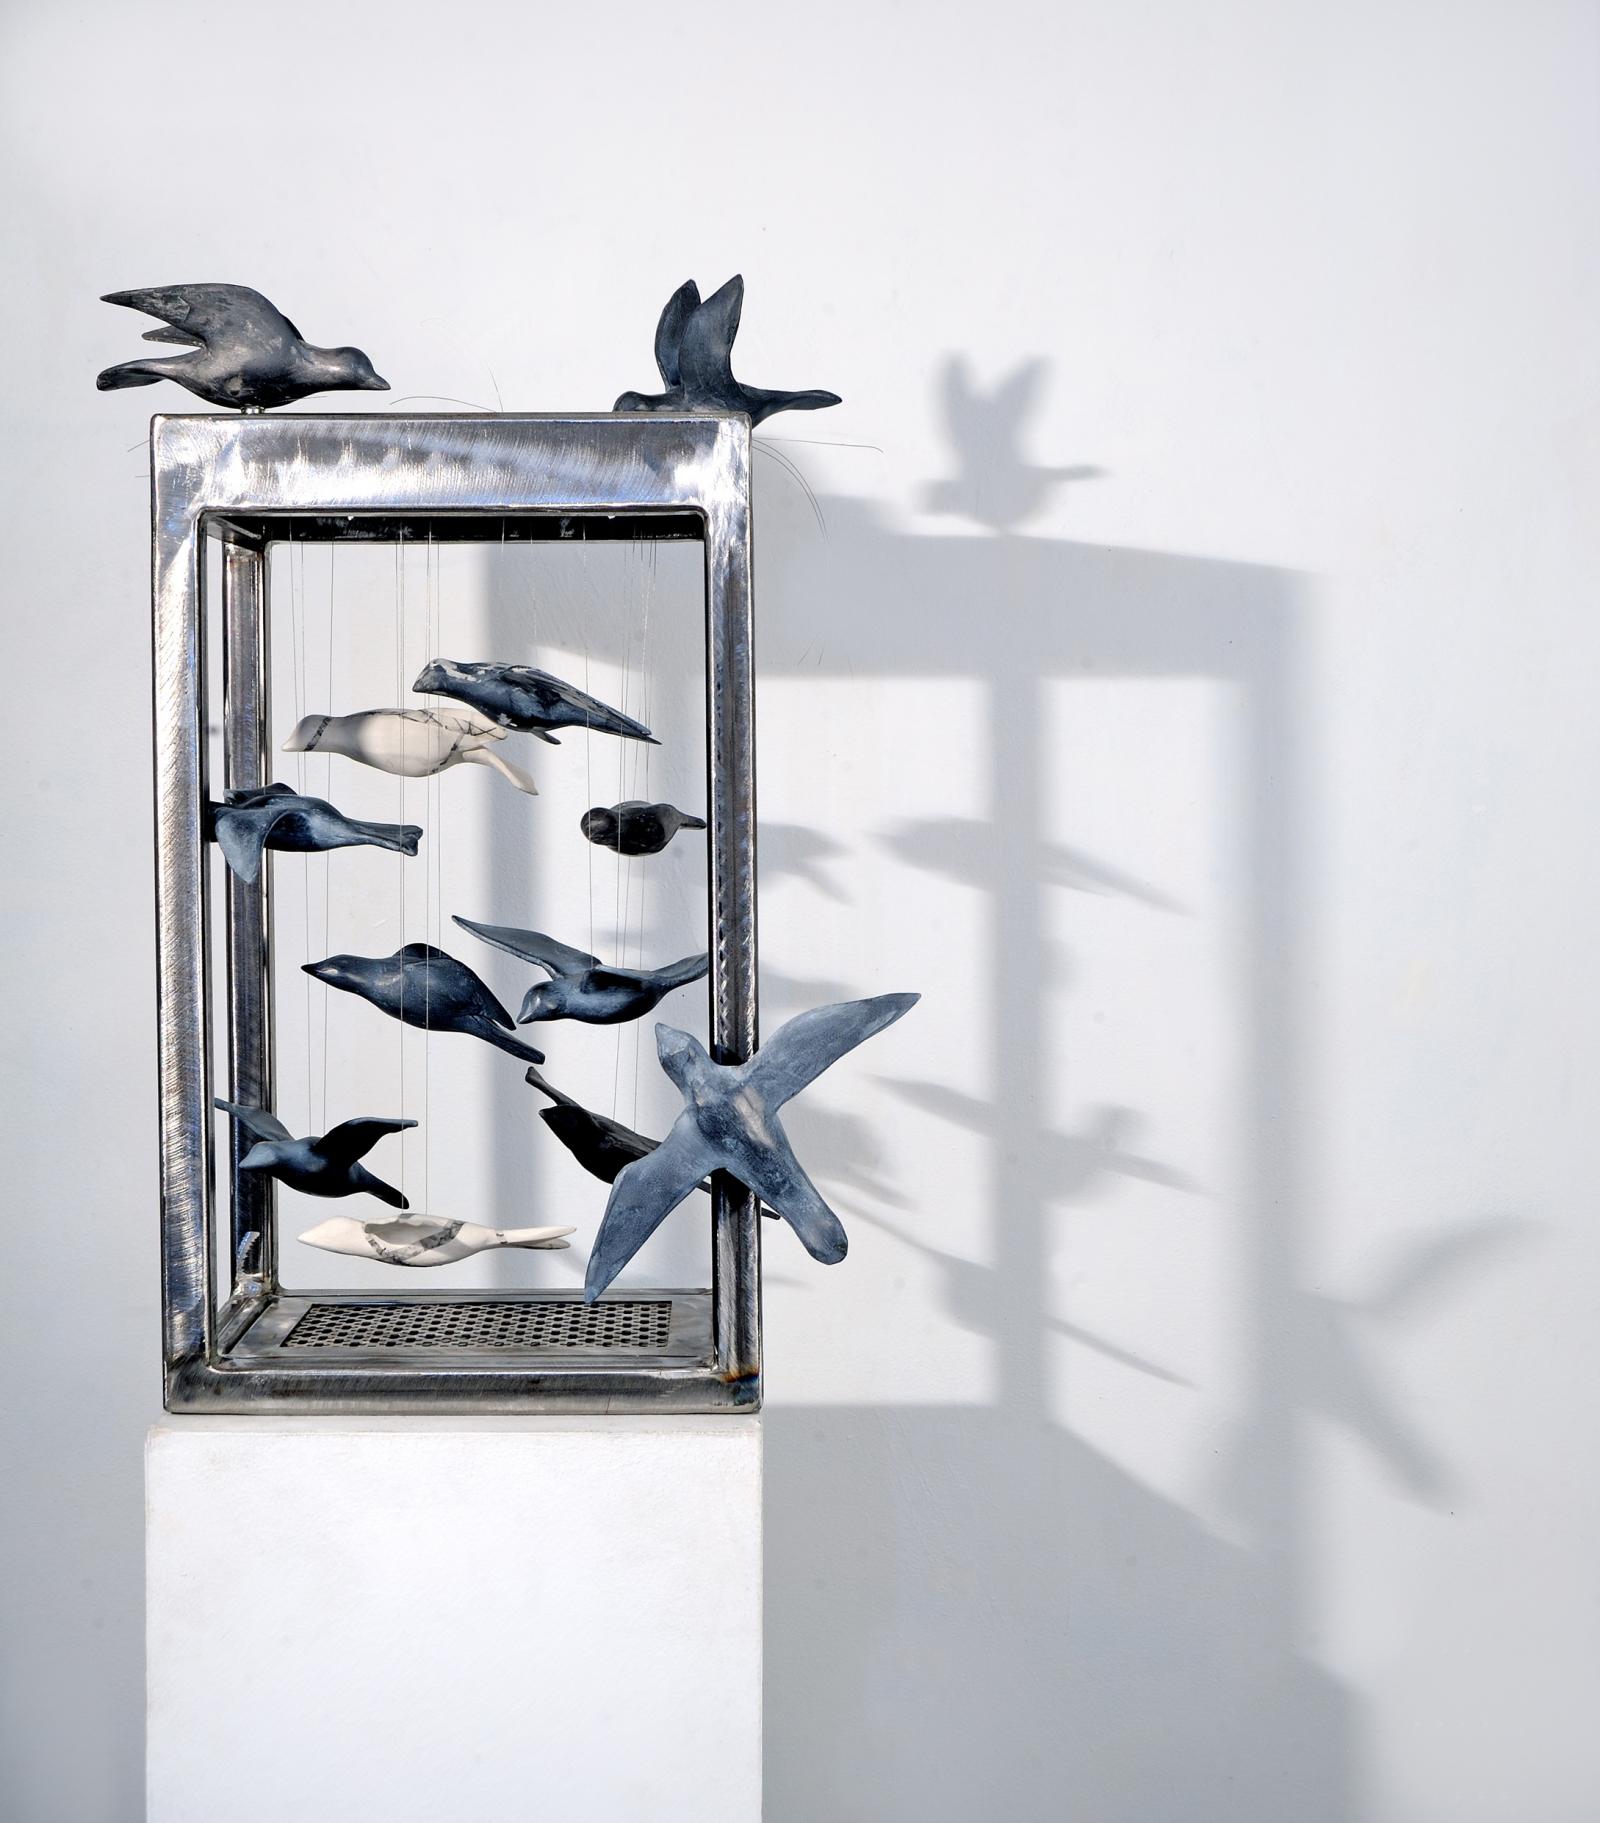 in this piece I used a new material (steel) to showcase the bird forms in flight.   These birds are somewhat contained by the "cage" but with the sides open, there is the possibility of flight.   The dilemma  for the avian world is the climate crisis that restricts their normal patterns of life: migration, feeding and nesting.   We have lost over 3 billion birds since 1970.